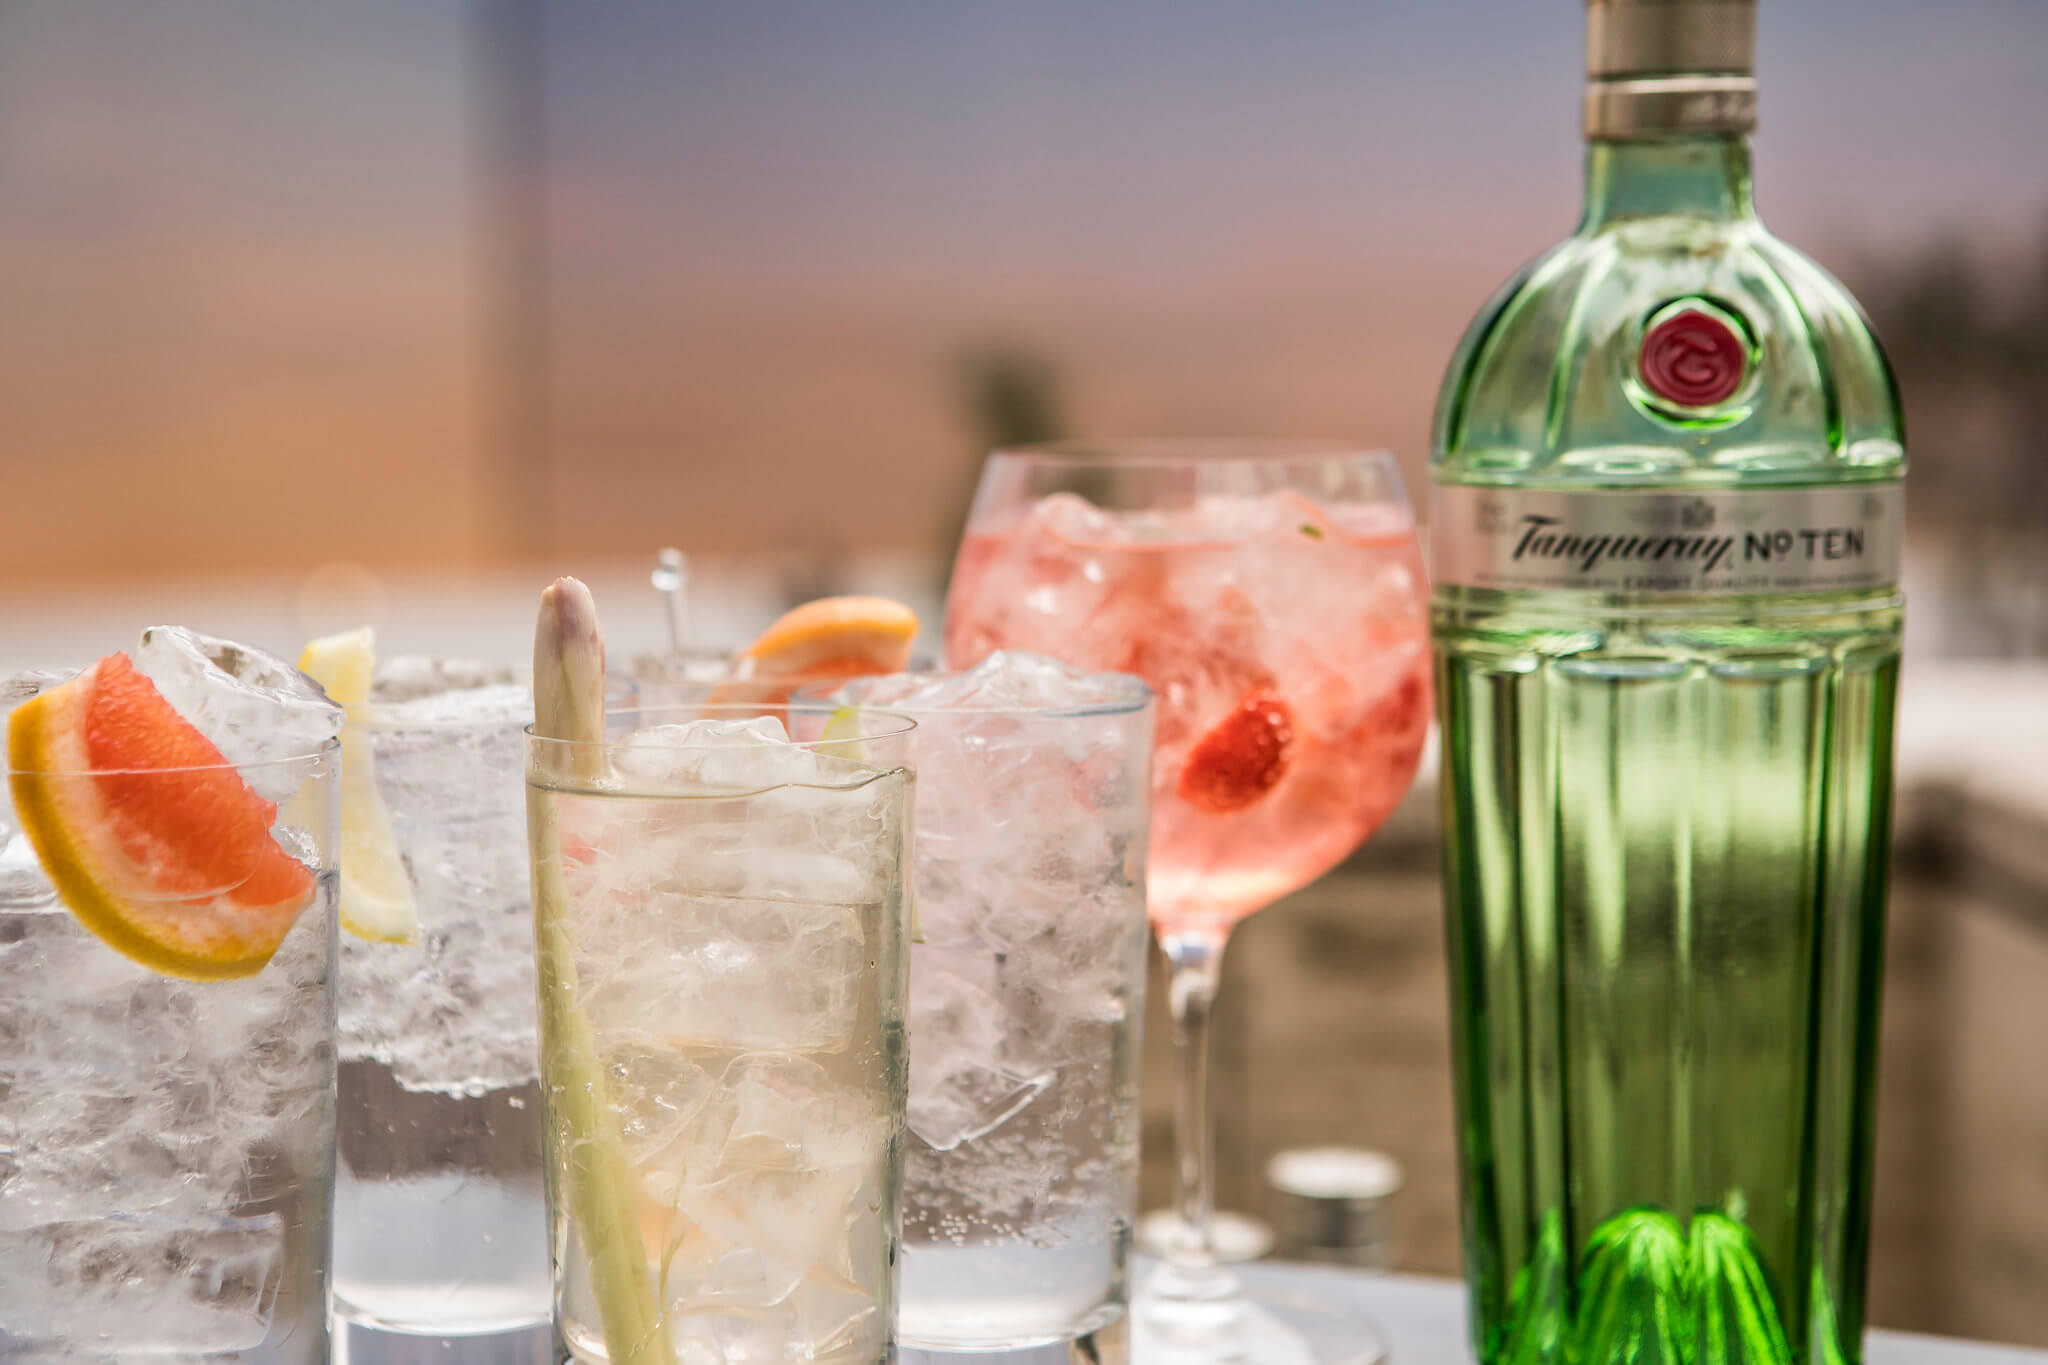 Tanqueray Bottle and Gin Cocktails